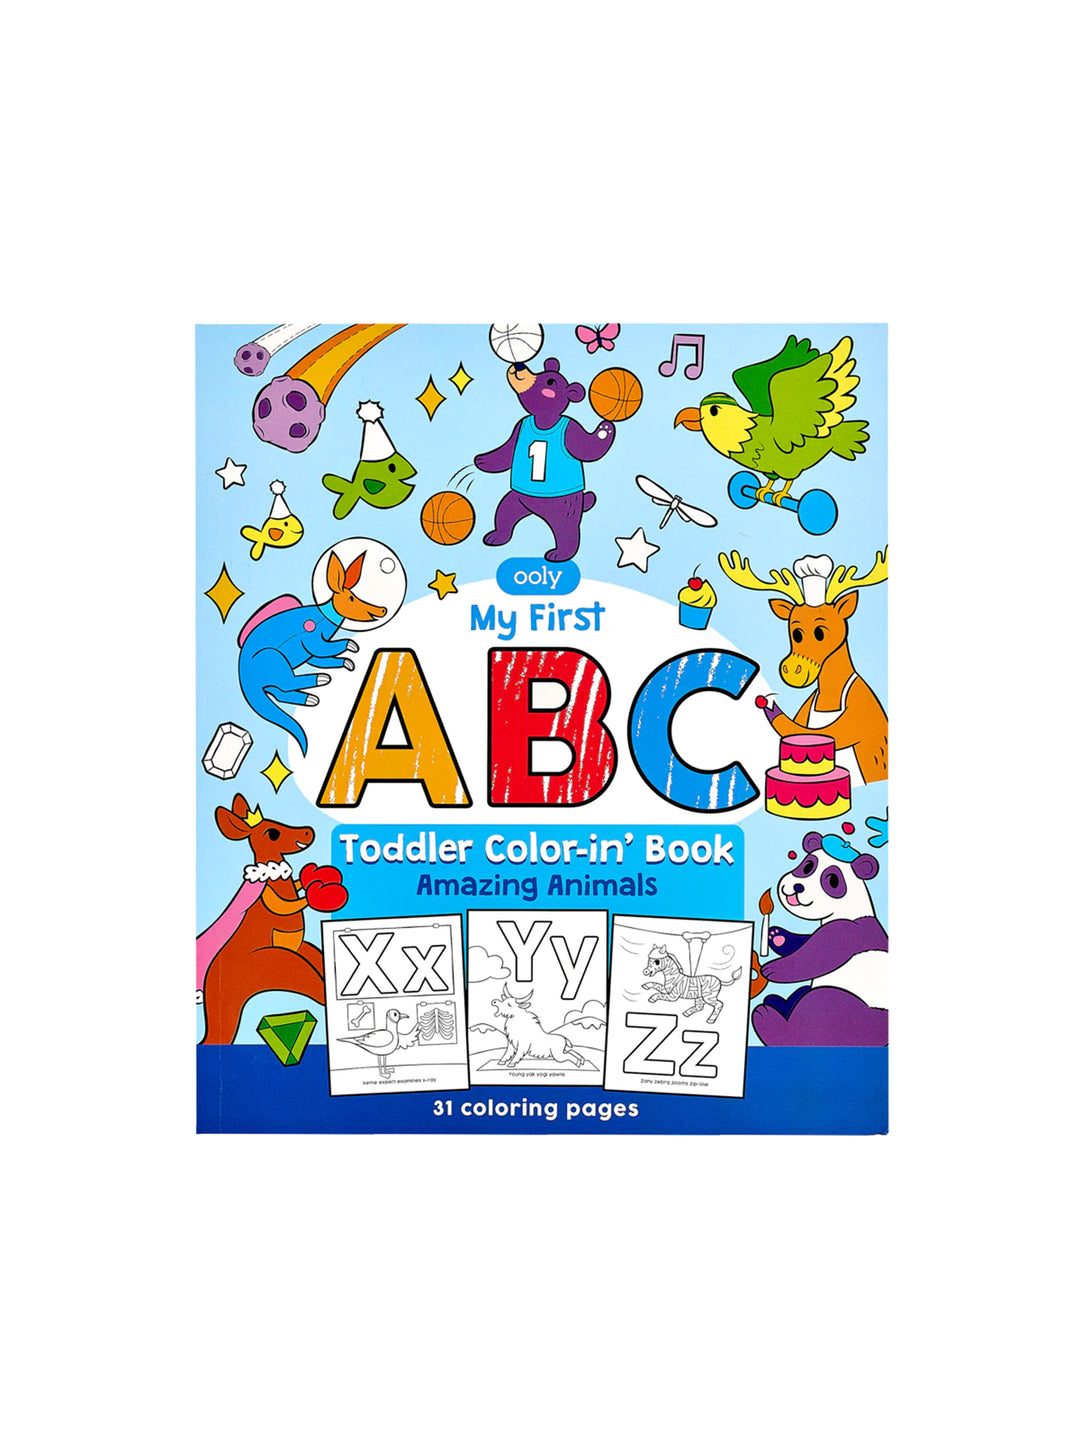 Ooly My First ABC Toddler Color-in' Book Amazing Animals